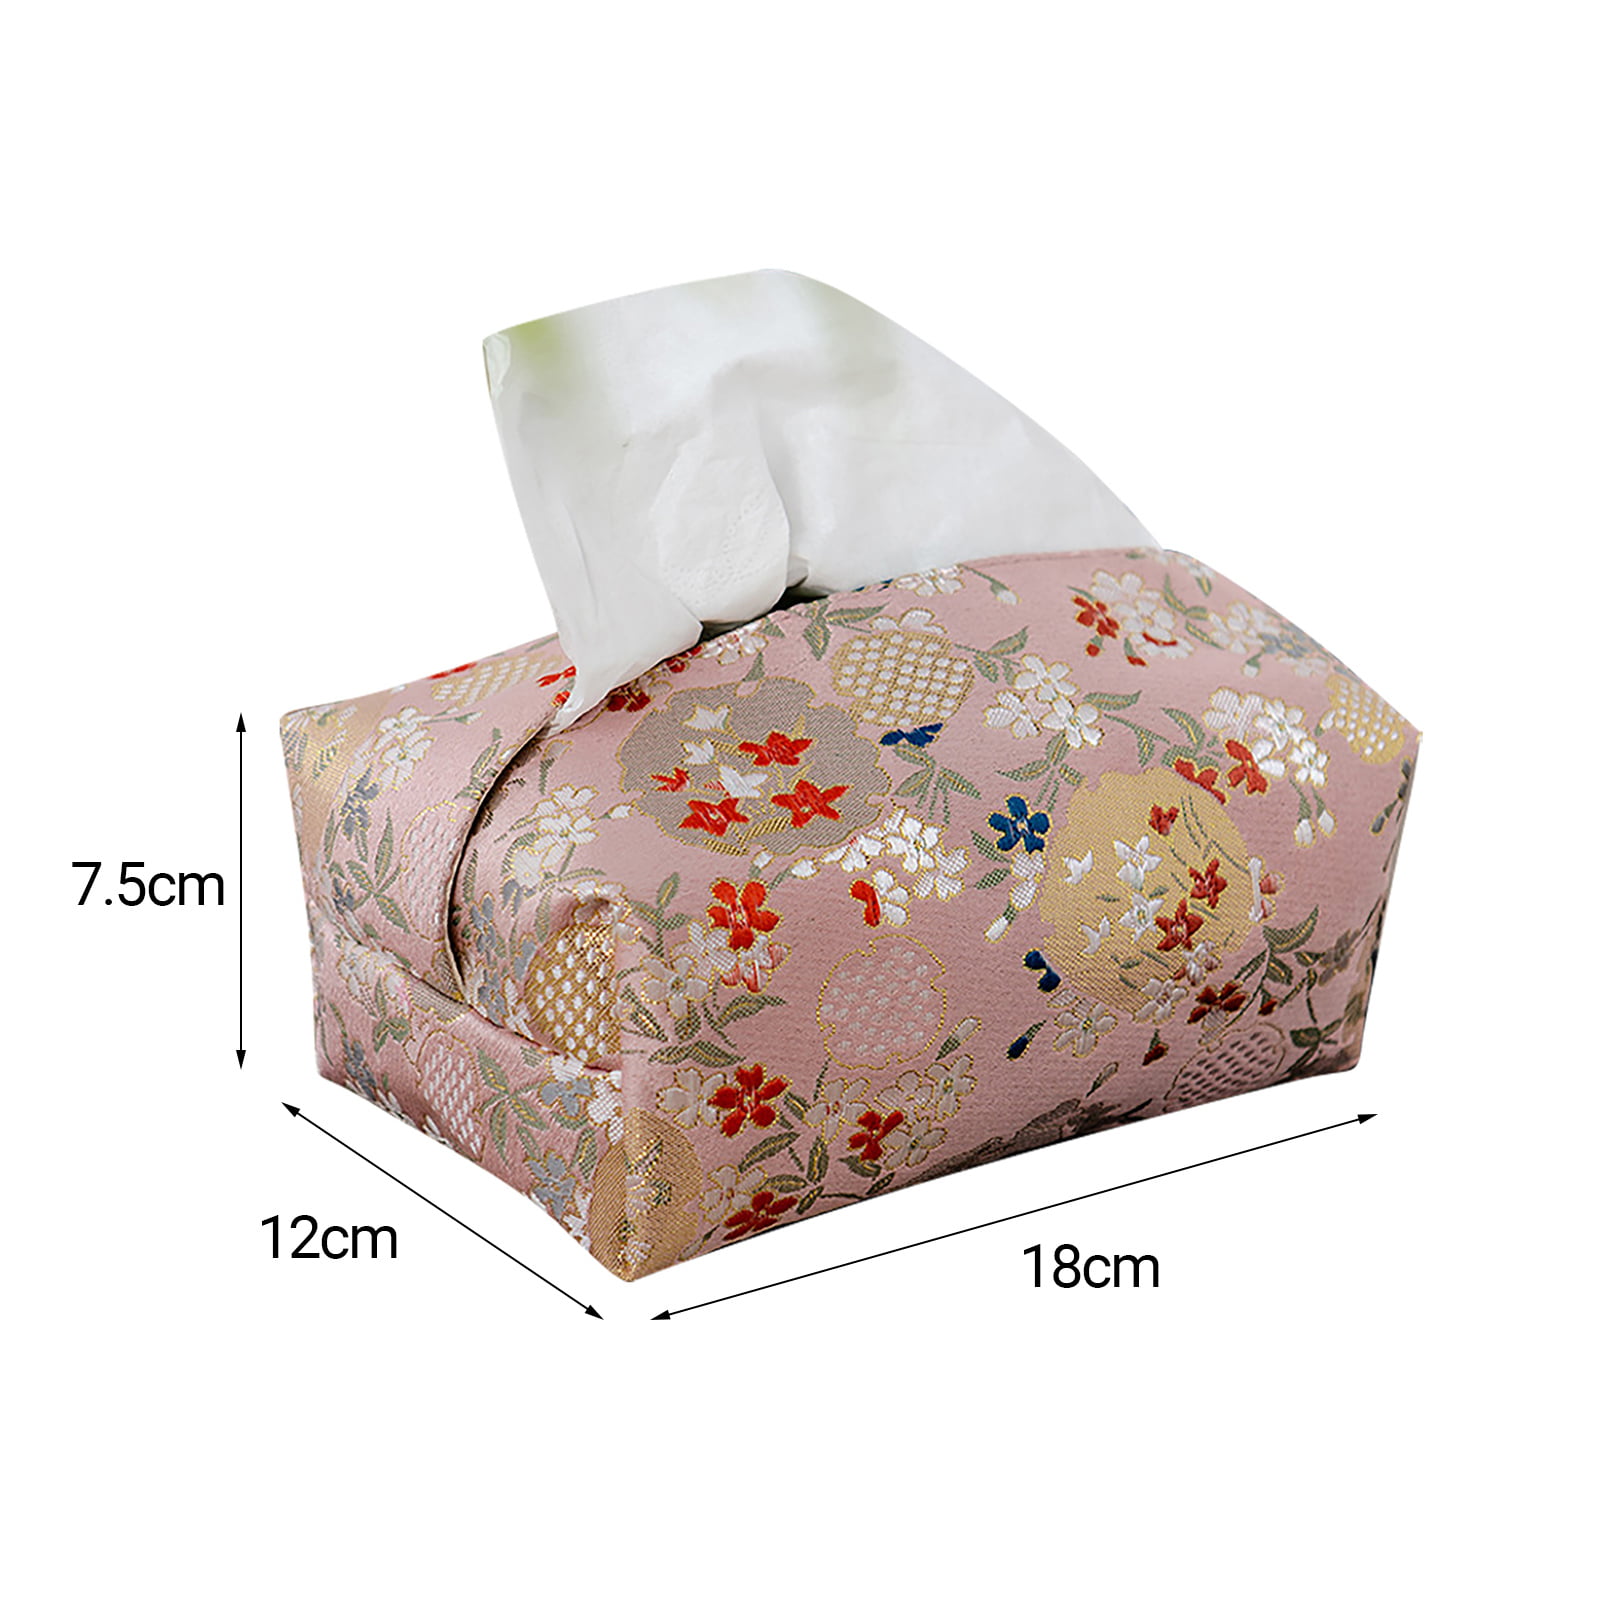 Toilet Paper Holders With Handle Travel Napkin Holder Reusable